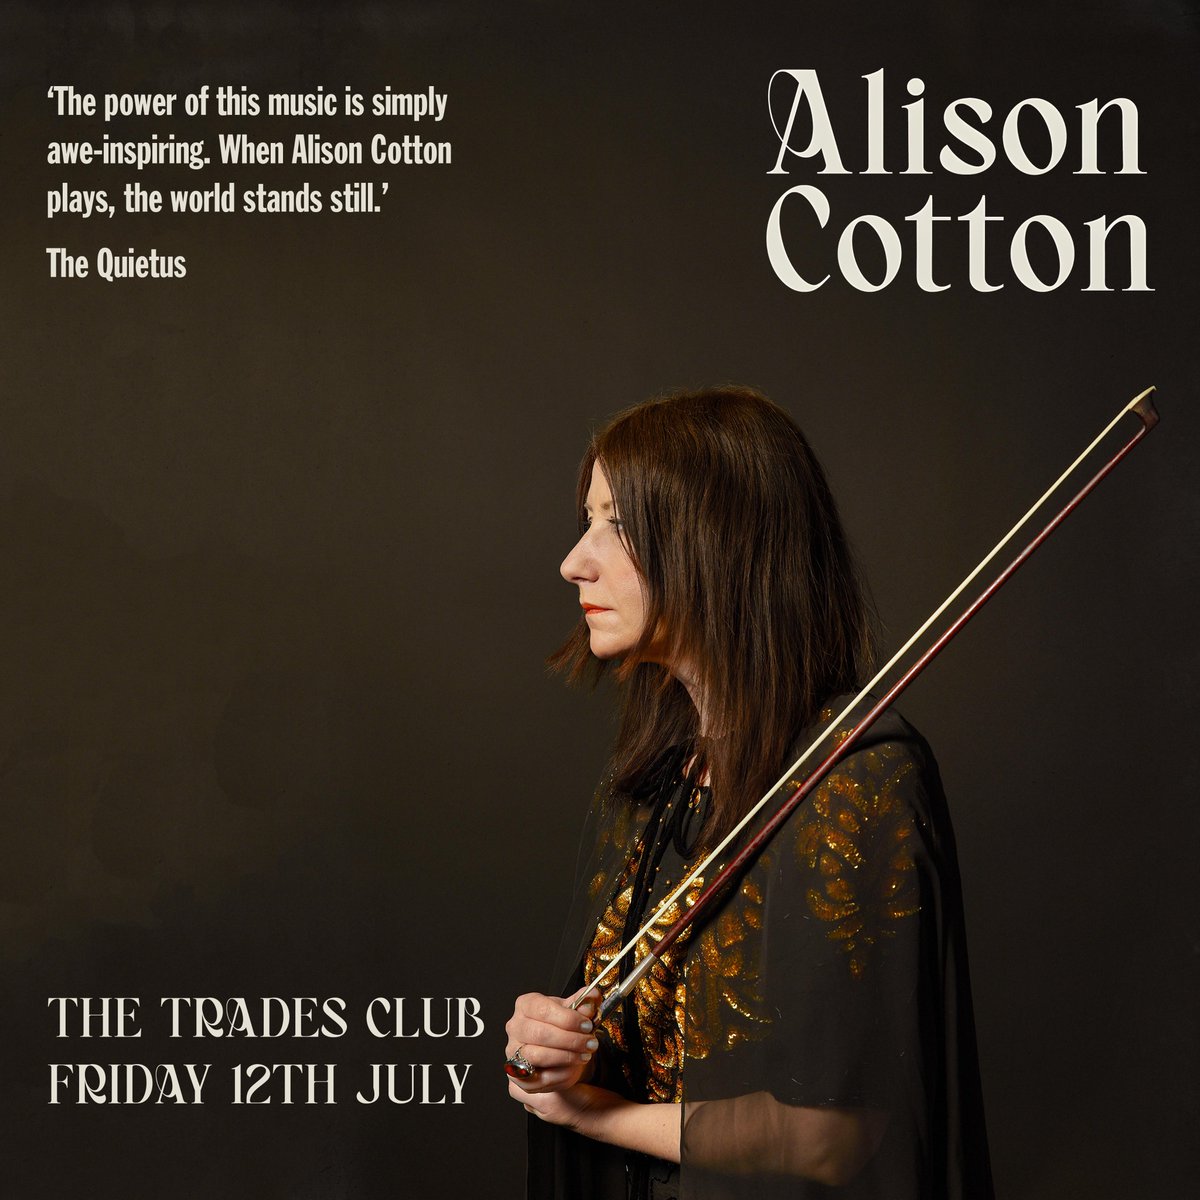 Excited to announce extraordinary violist and vocalist @alison__cotton plays @thetradesclub #hebdenbridge on Friday 12th July. Tickets now on sale HERE >> thetradesclub.com/events/cotton